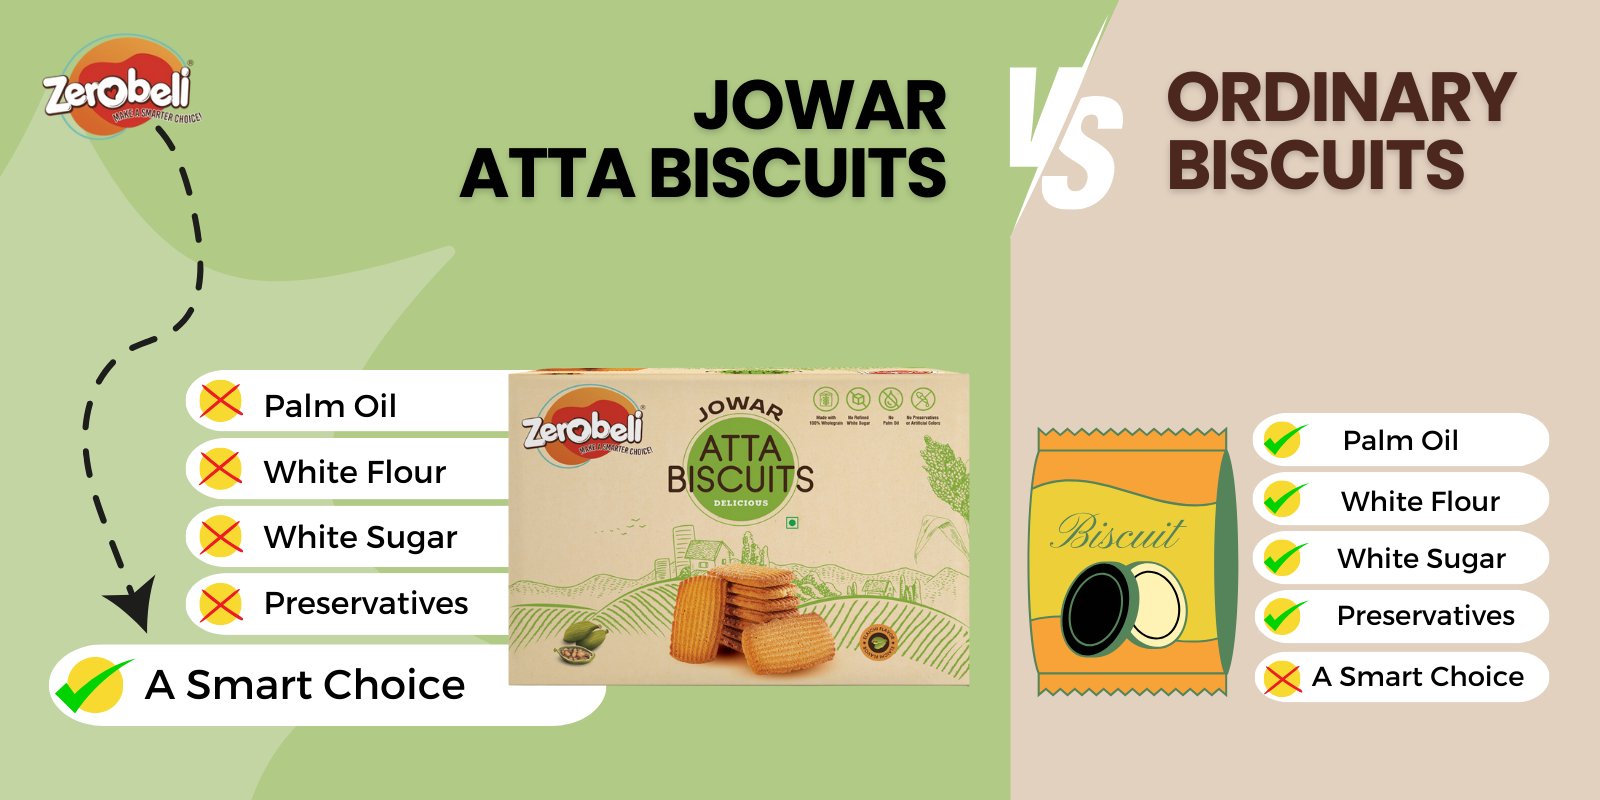 Jowar_atta_Biscuit_Competition_d065480b-444f-4e7d-8f17-9a7003ef3427.png